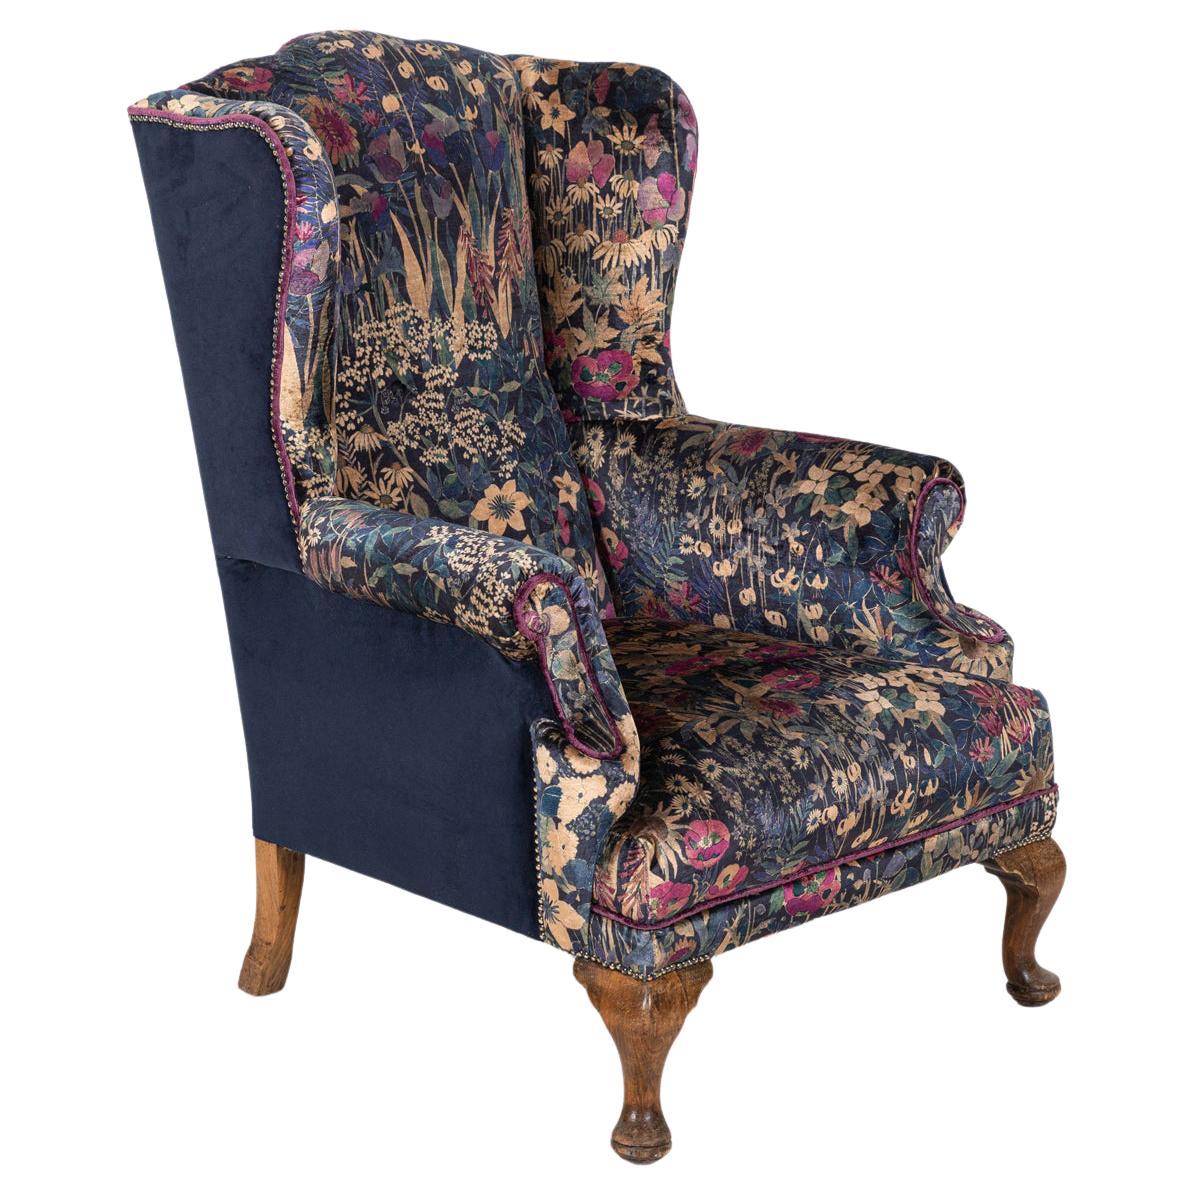 19thC English Mahogany Wingback Armchair Re-Upholstered in Liberty For Sale